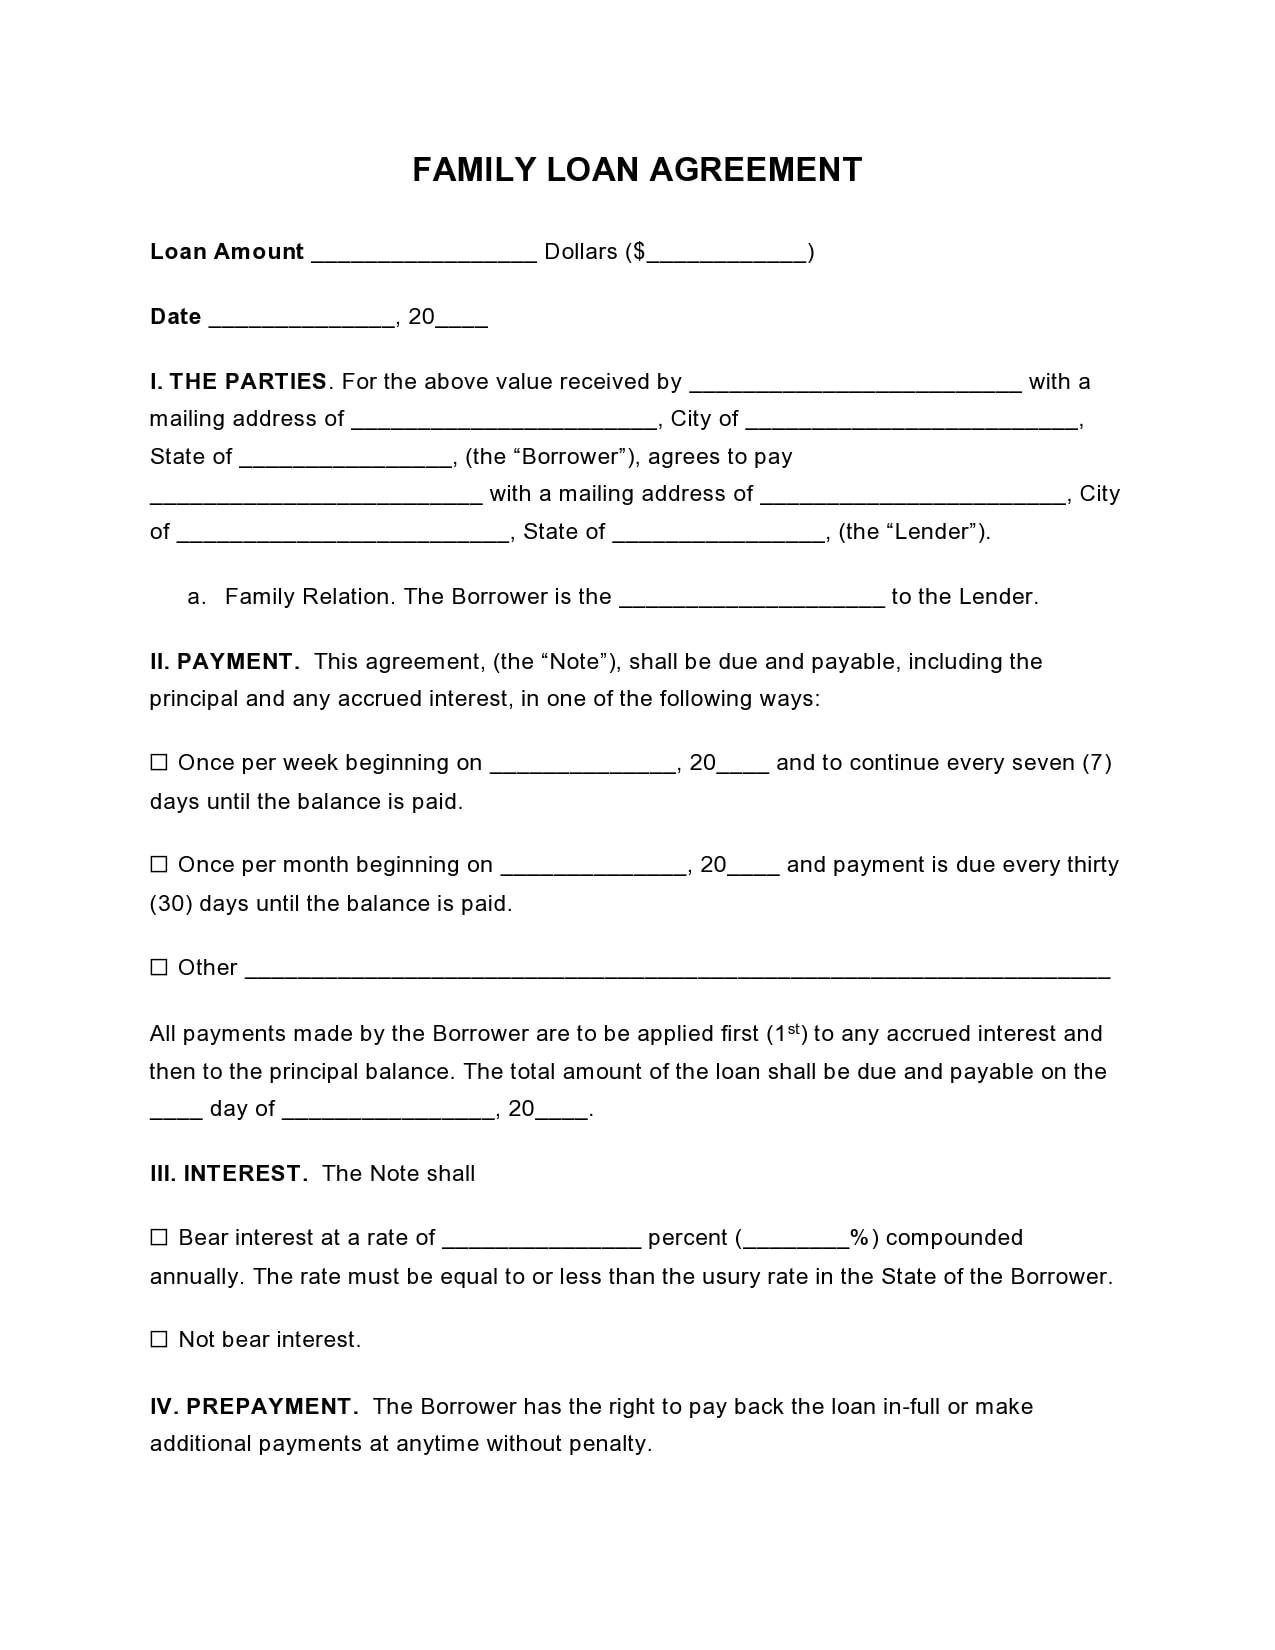 25 Simple Family Loan Agreement Templates (25% Free) For Blank Loan Agreement Template